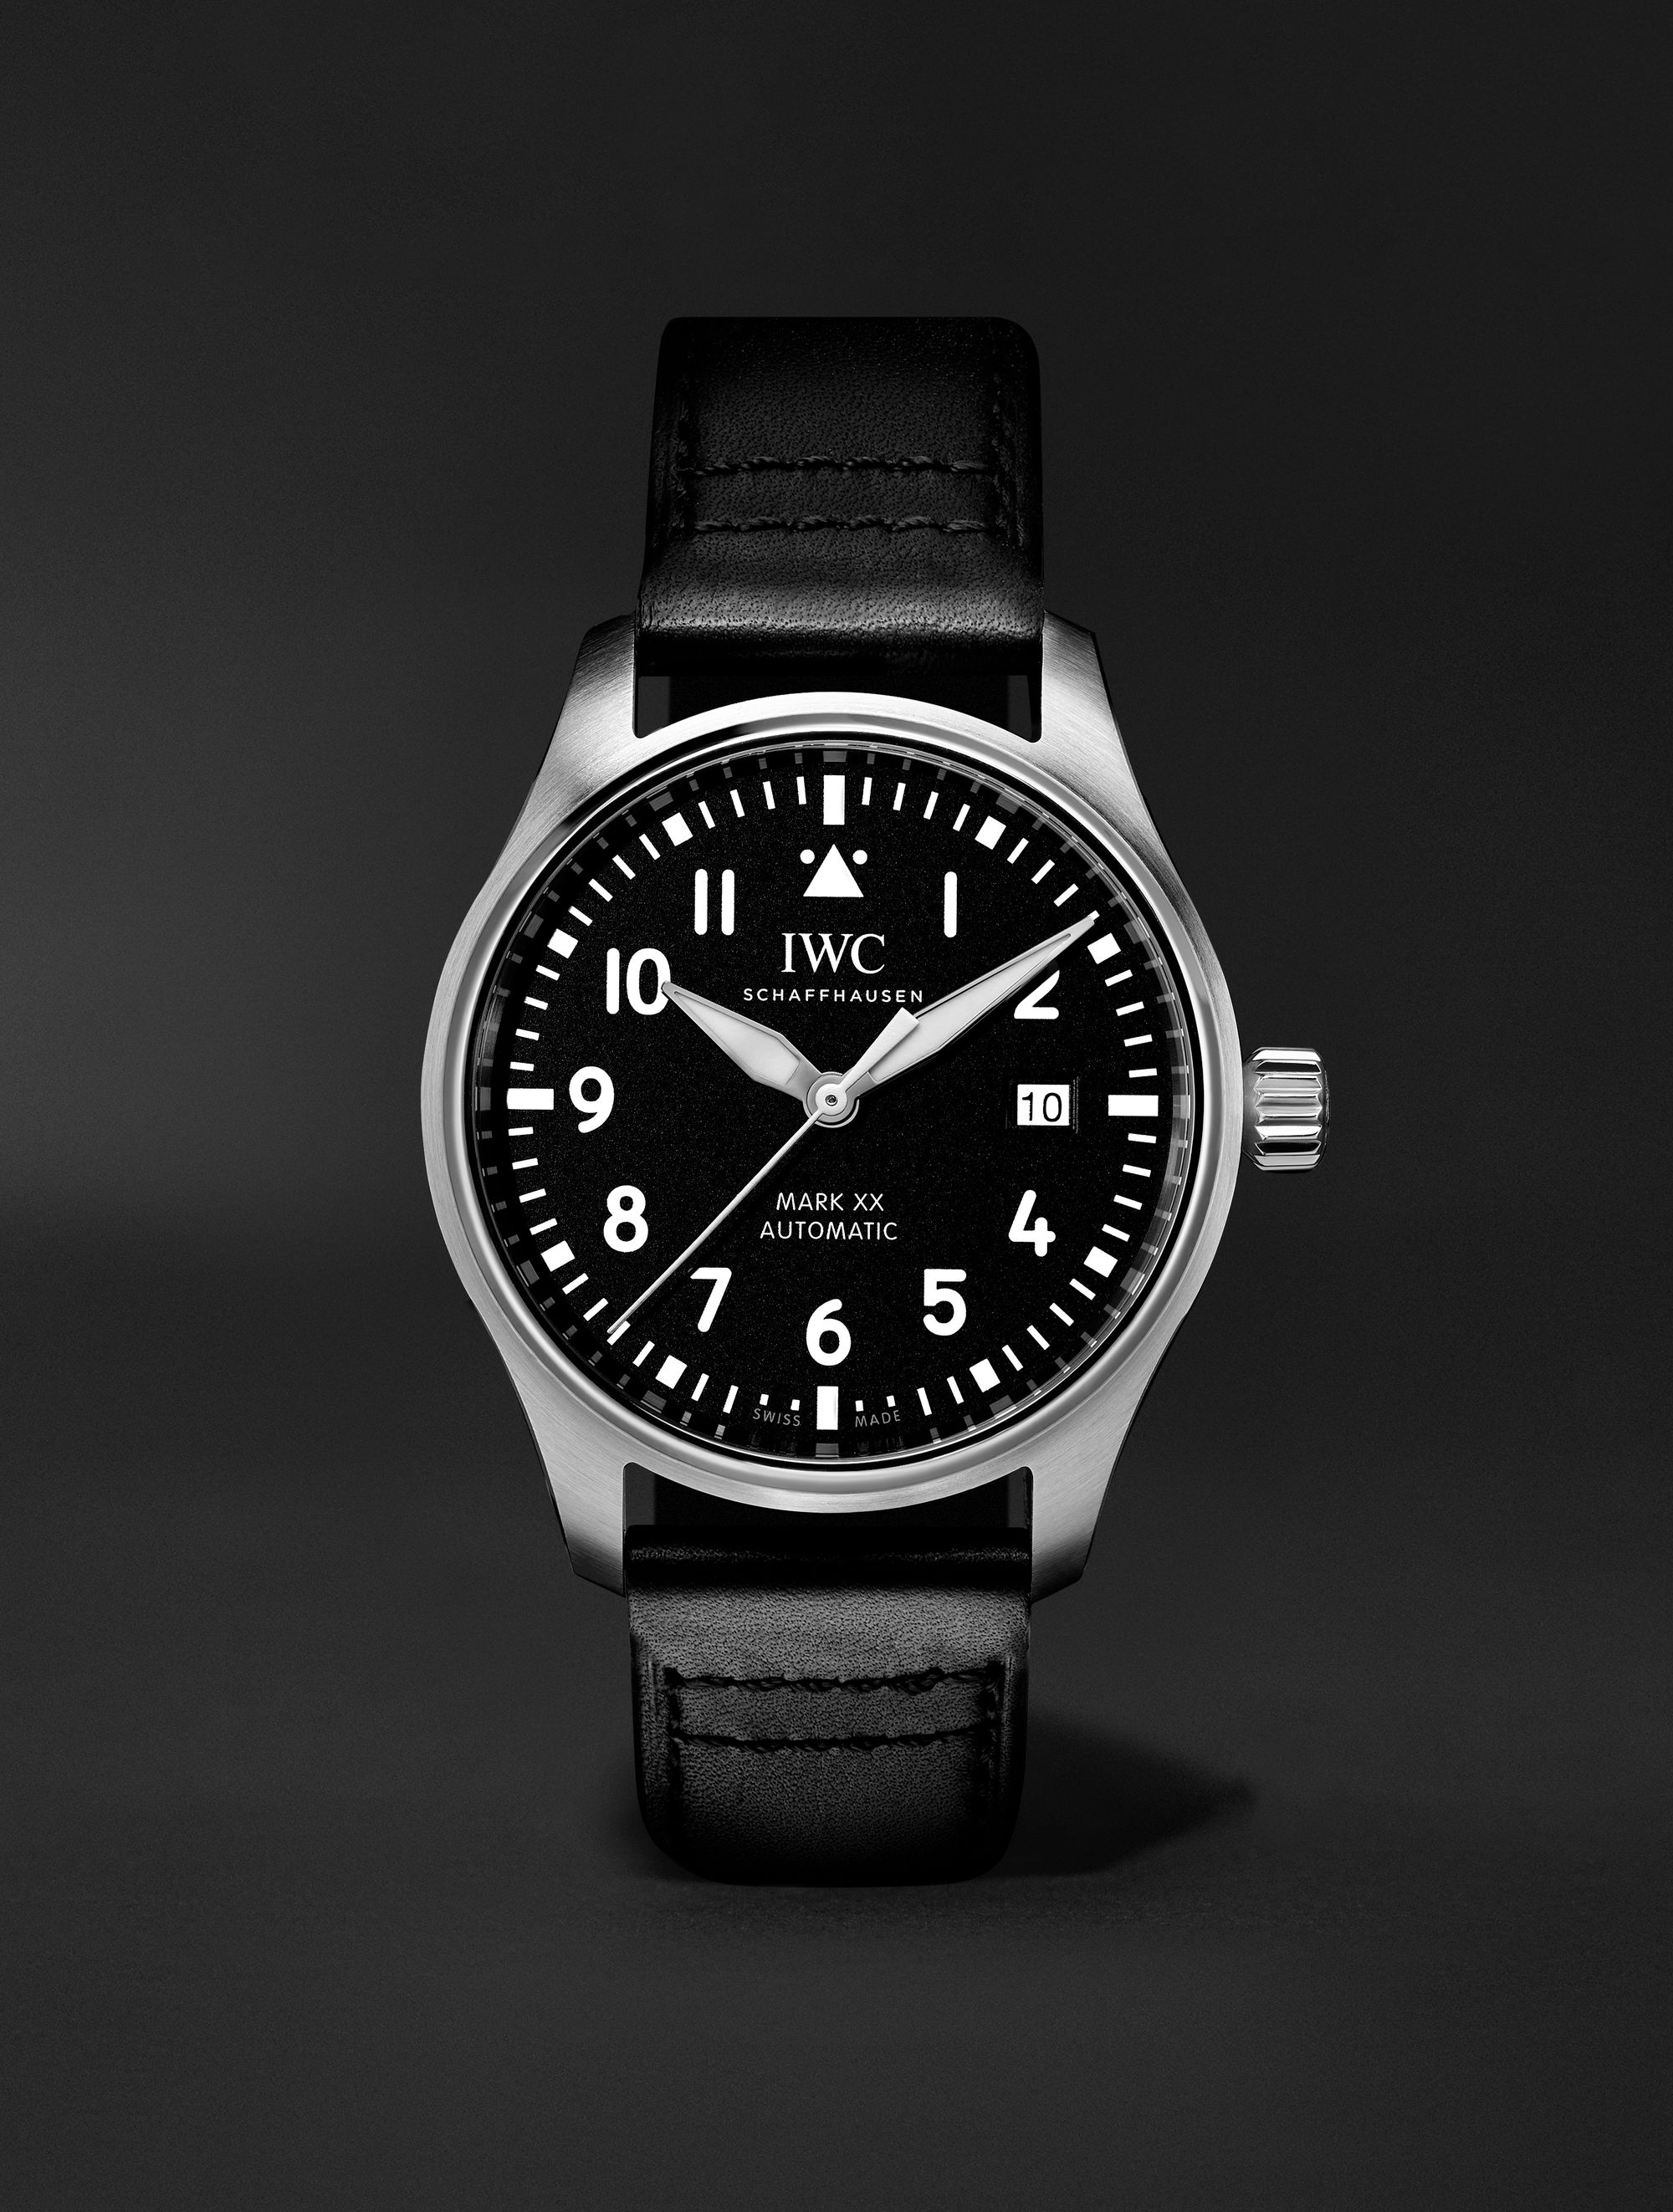 IWC SCHAFFHAUSEN Pilot's Mark XX Automatic 40mm Stainless Steel and Leather Watch, Ref. No. IWIW328201